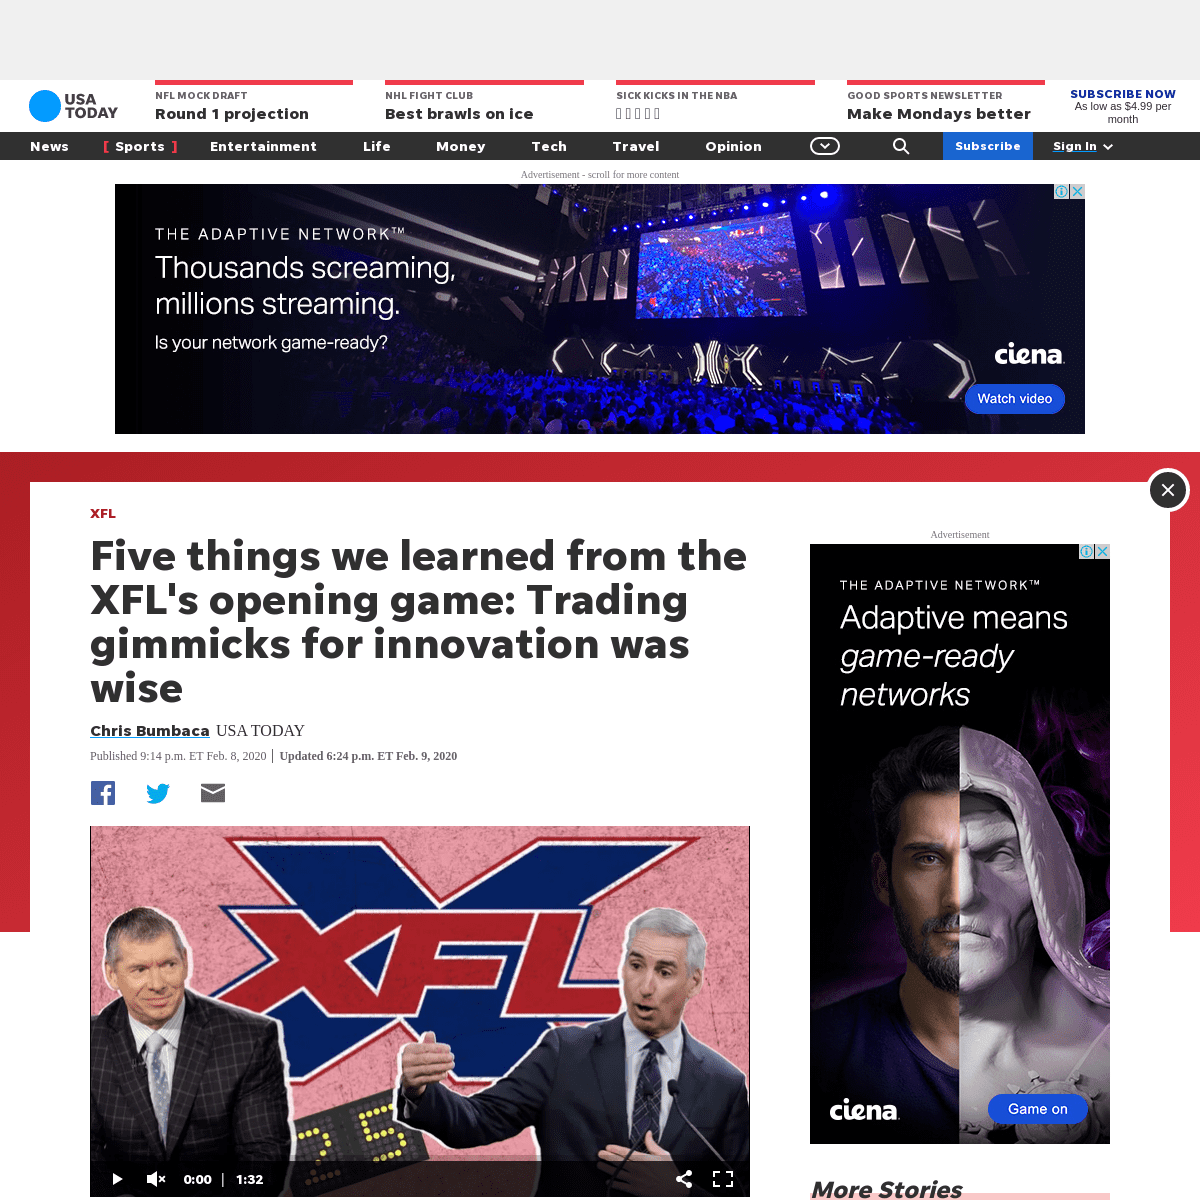 A complete backup of www.usatoday.com/story/sports/xfl/2020/02/08/xfl-opening-weekend-five-things-we-learned-dragons-dc-defender